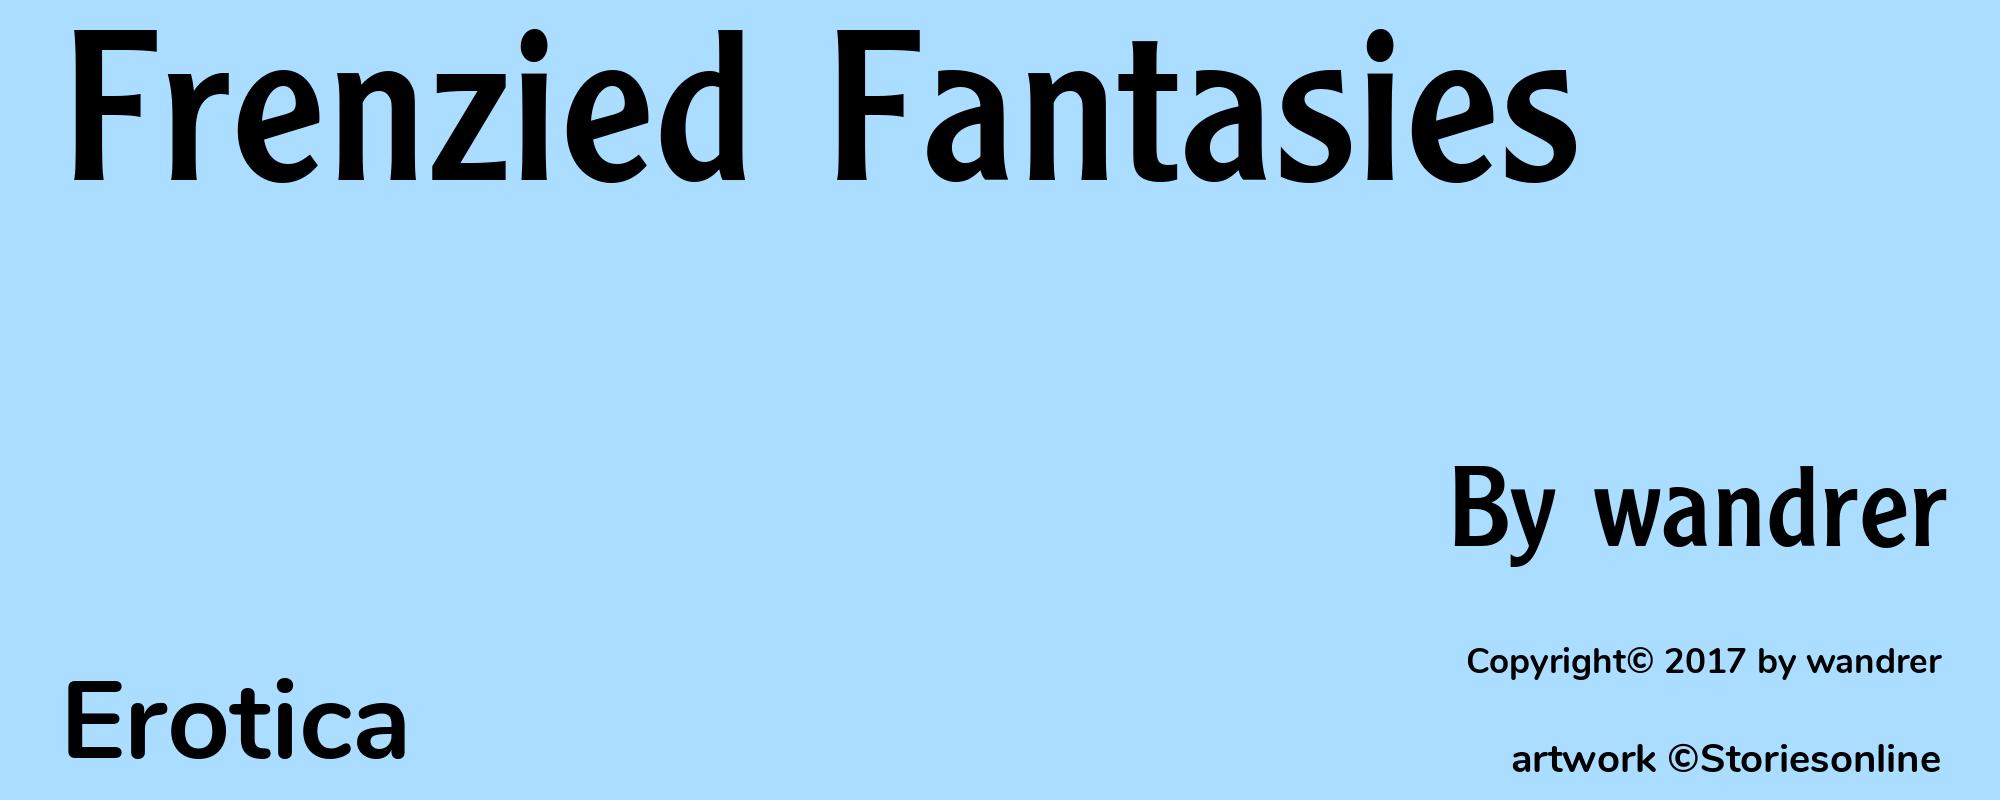 Frenzied Fantasies - Cover